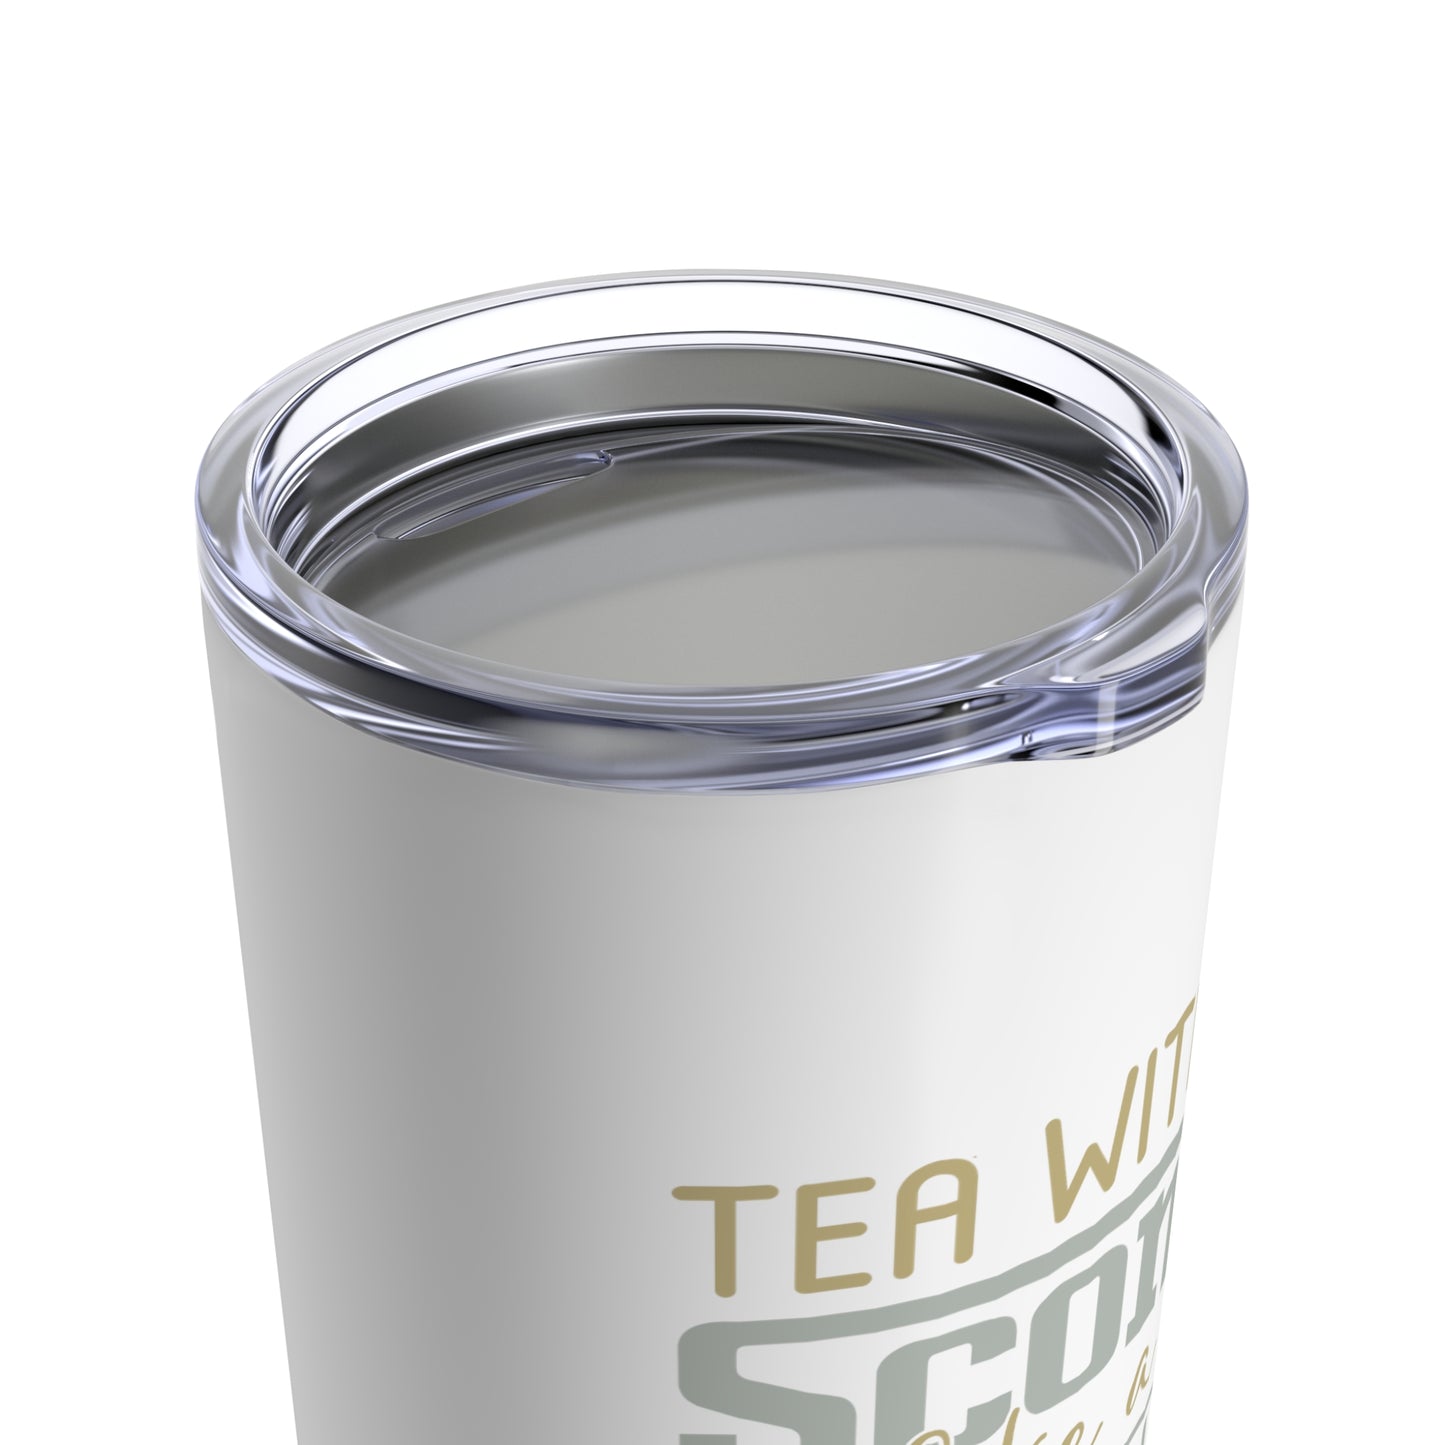 Tea Without Scones is Like a Hug Without a Squeeze 20 oz Tumbler